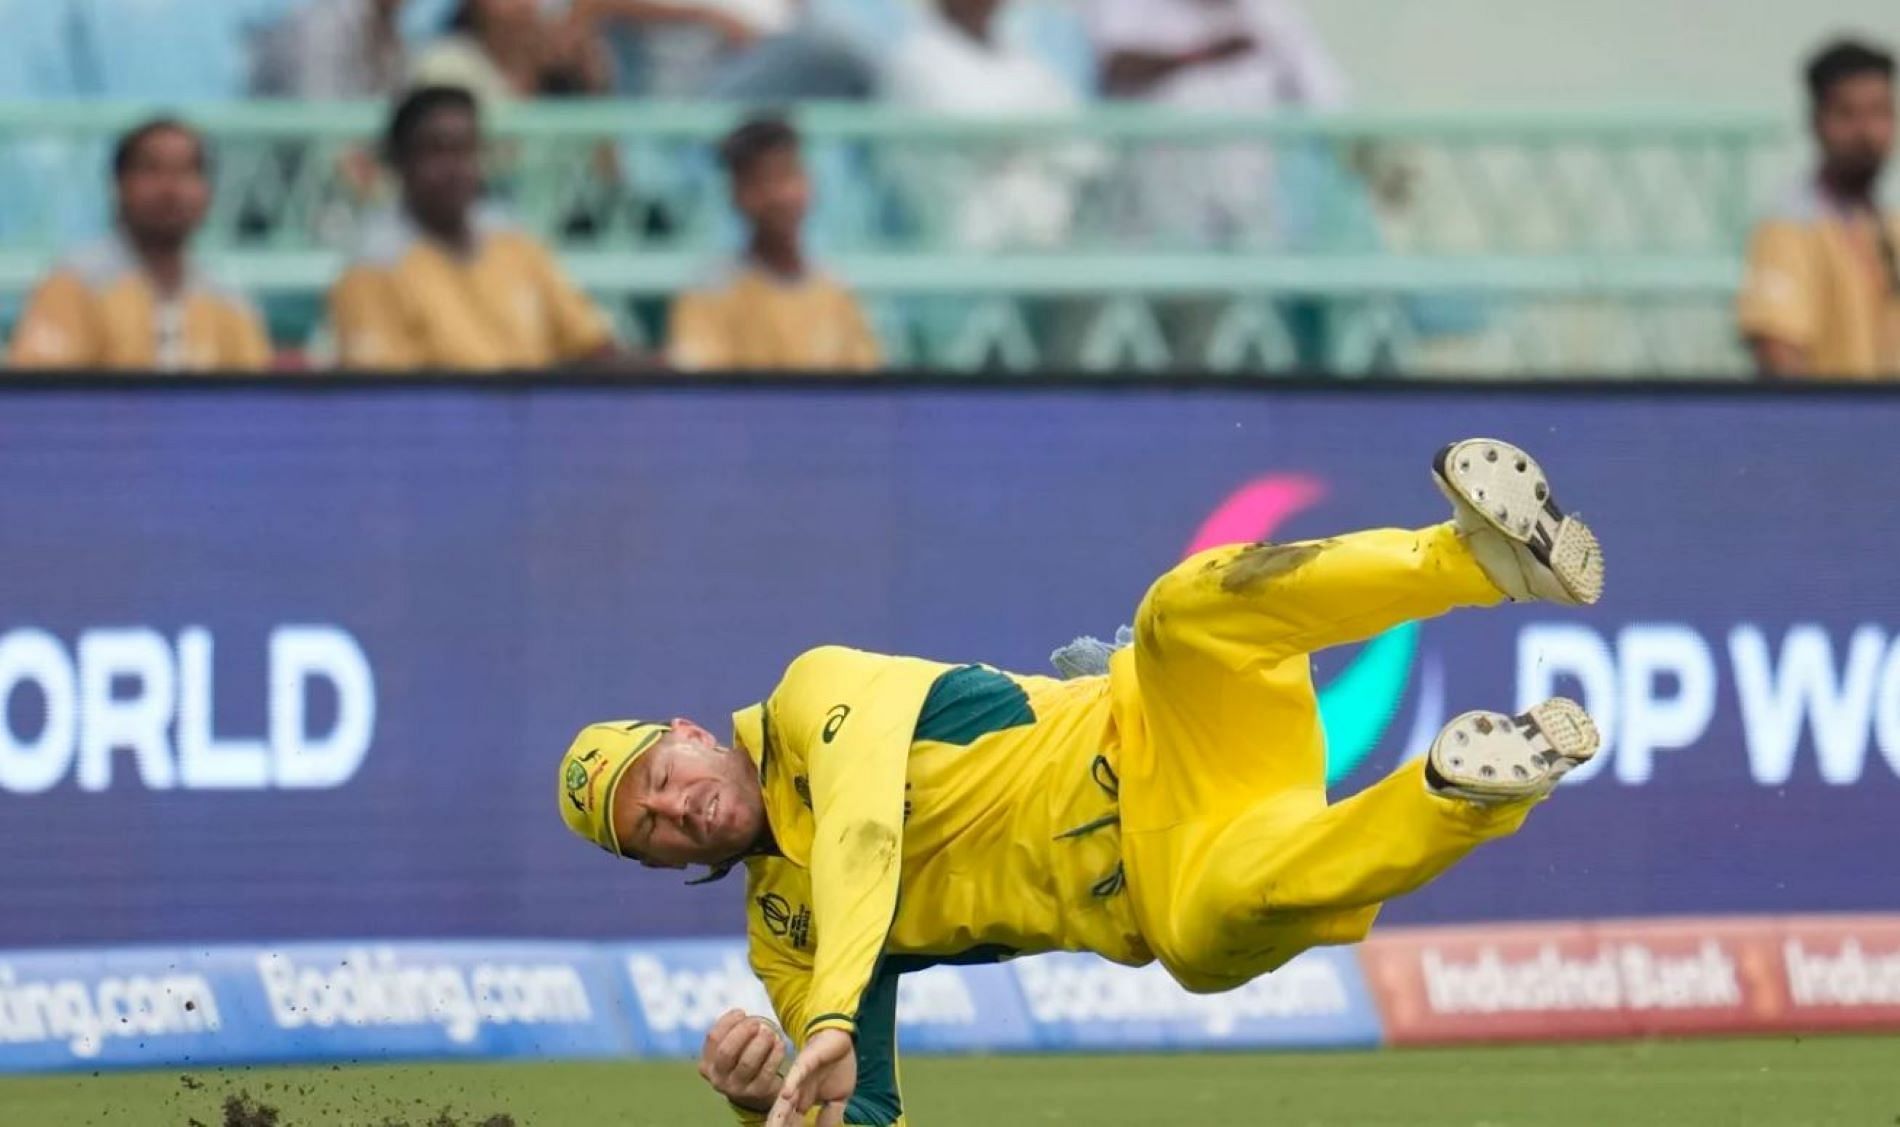 Warner has been a livewire in the field for Australia